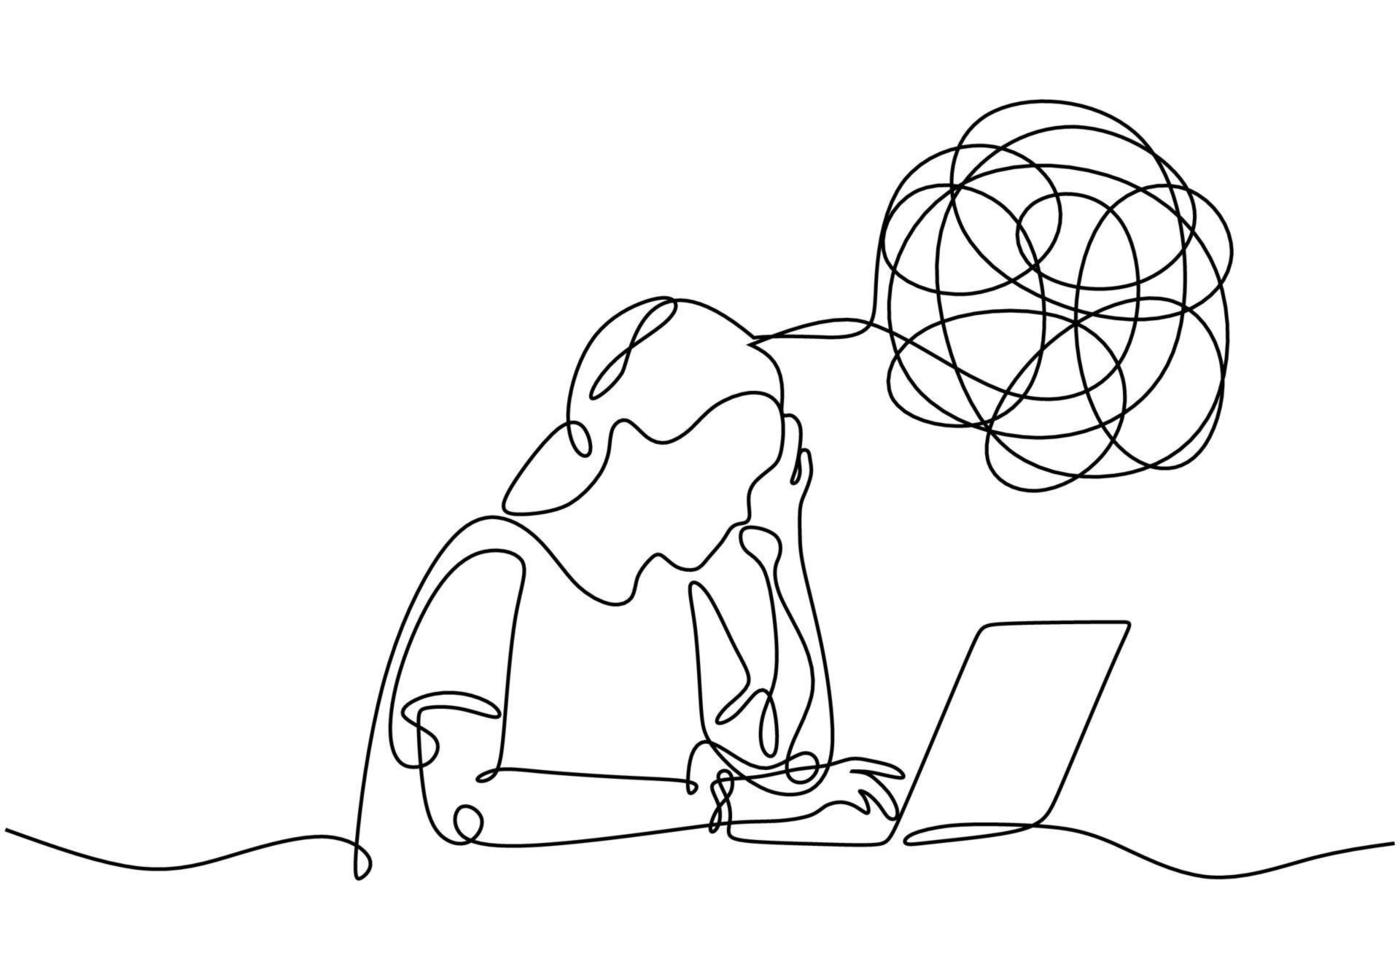 Sad, unhappy young woman continuous line drawing vector